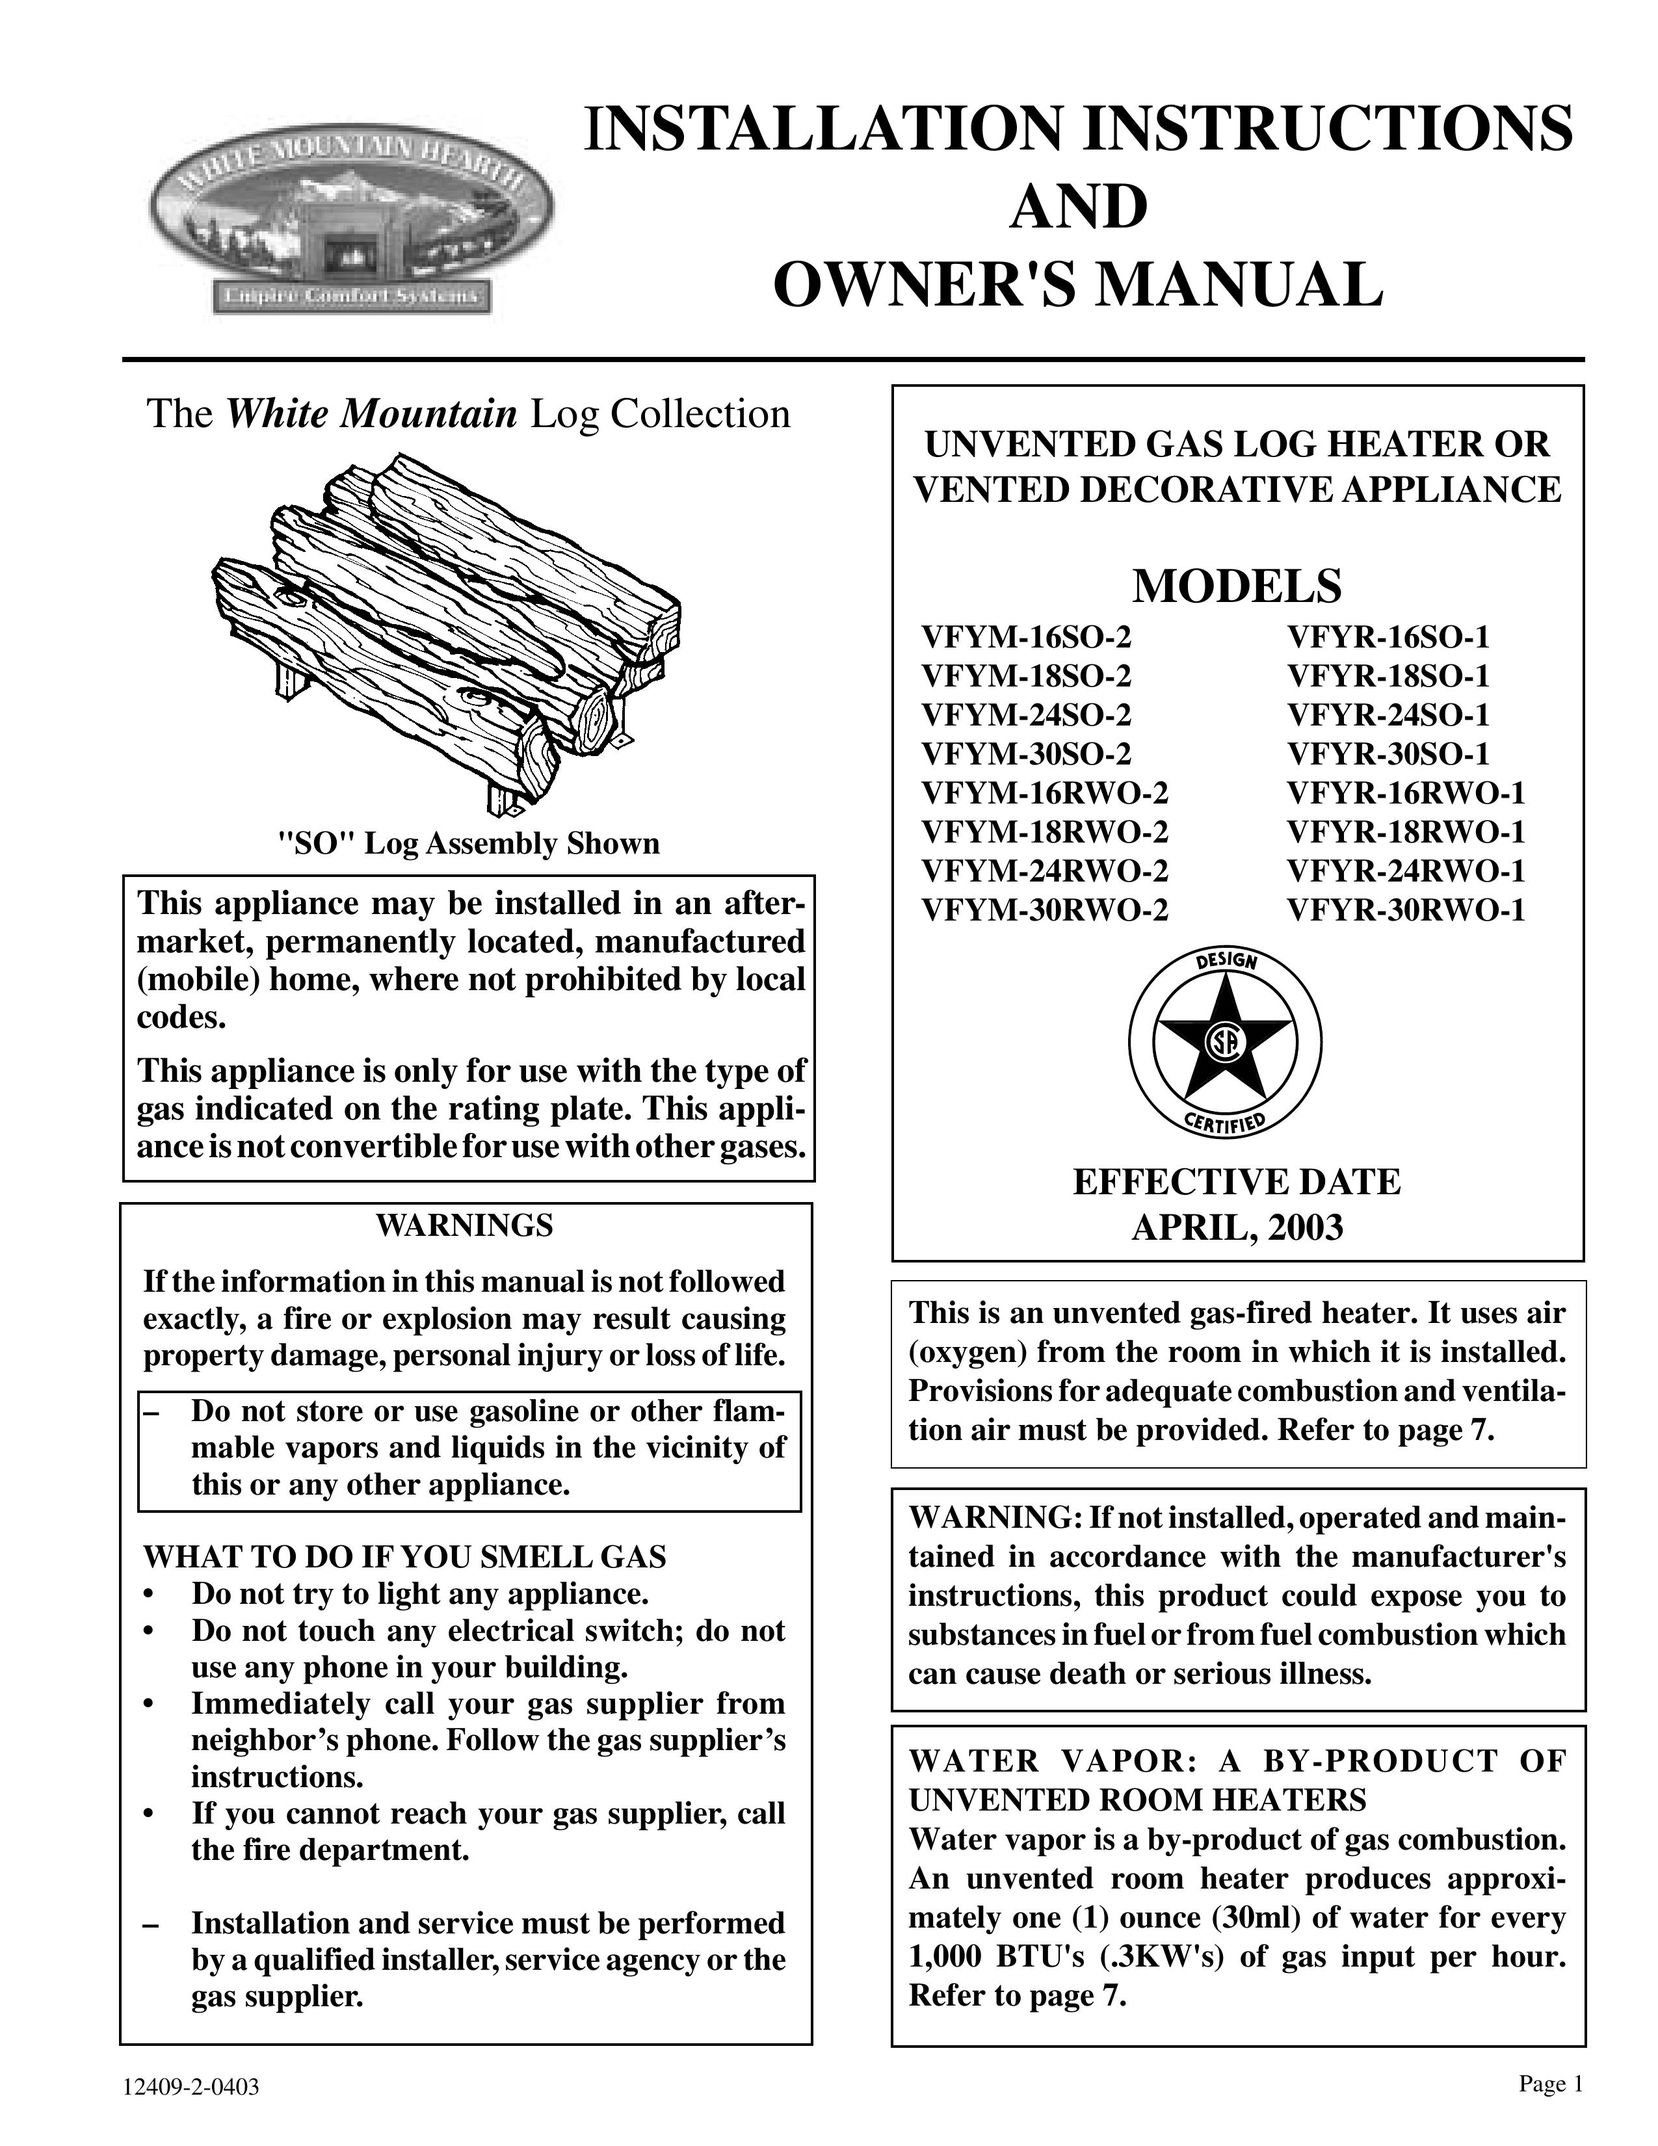 Empire Comfort Systems VFYM-24RWO-2 Water Heater User Manual